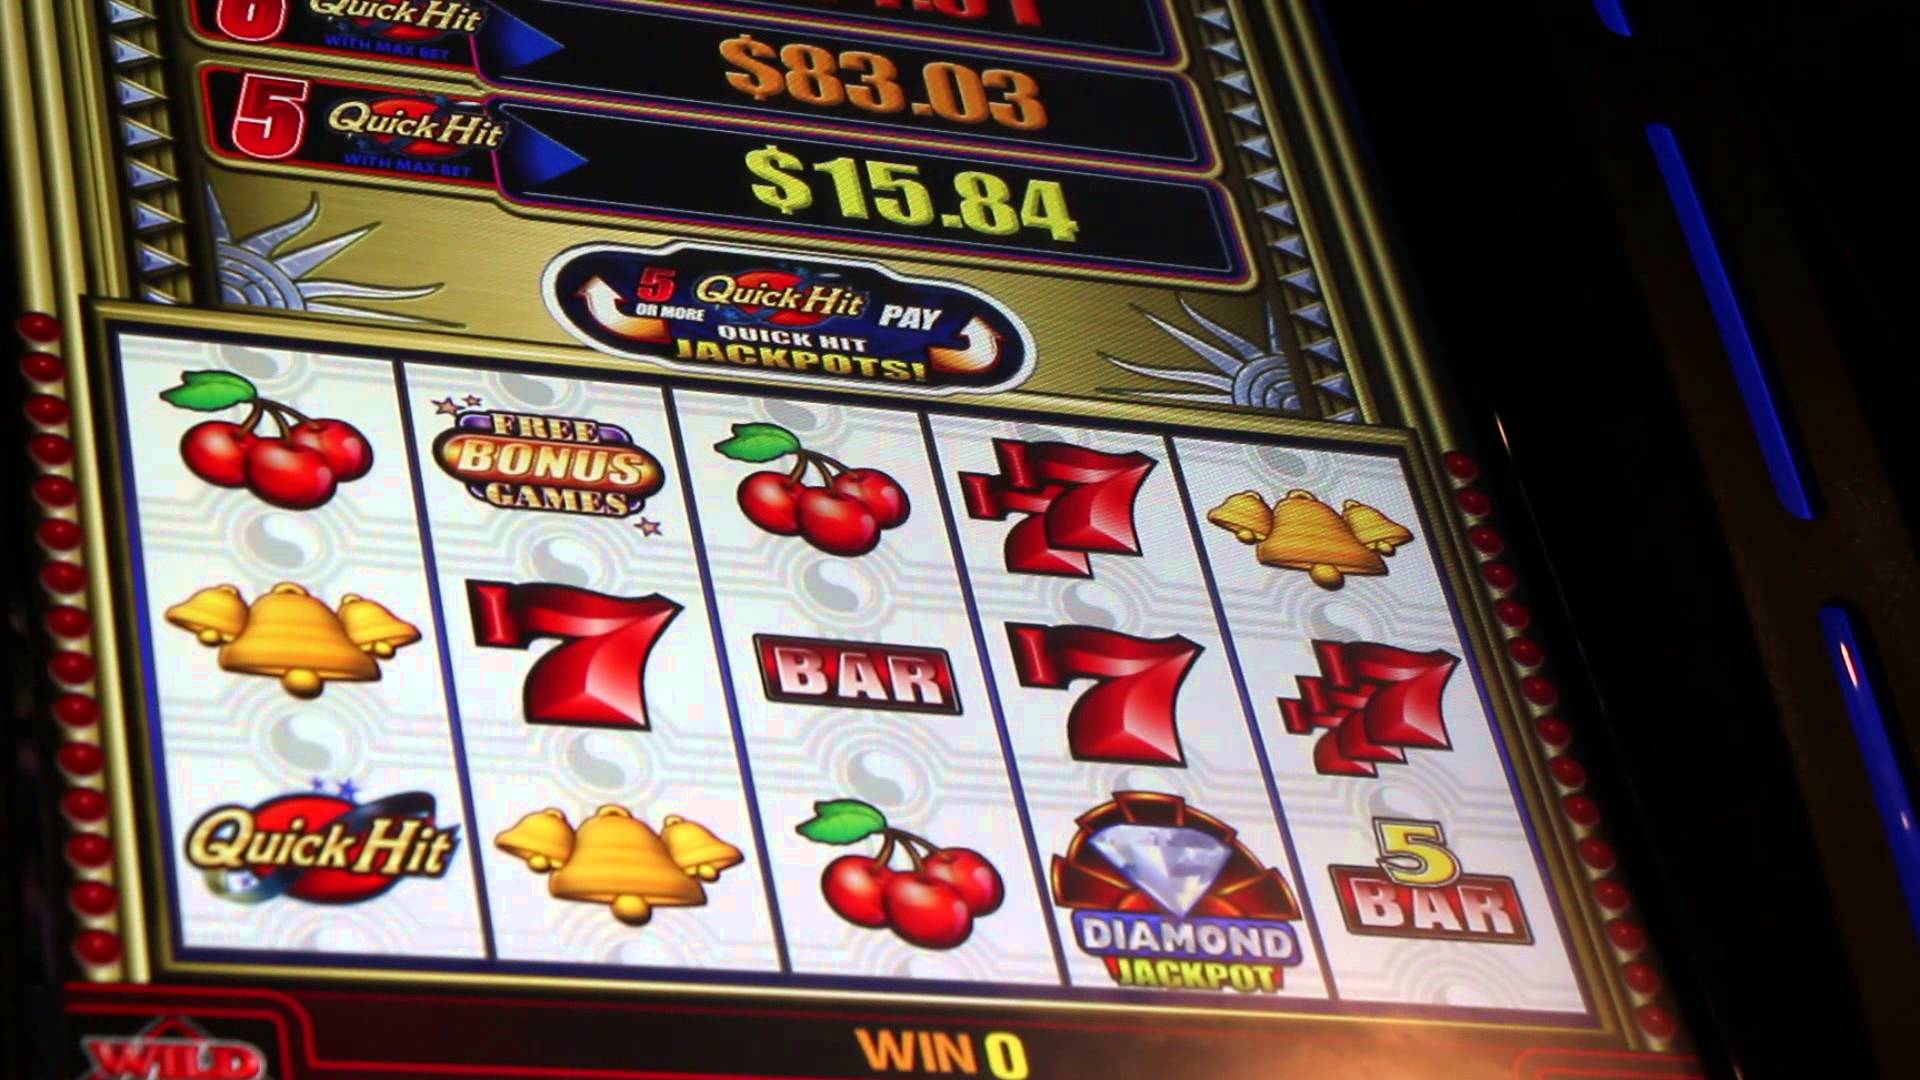 how to cheat carnival of mystery slot machines